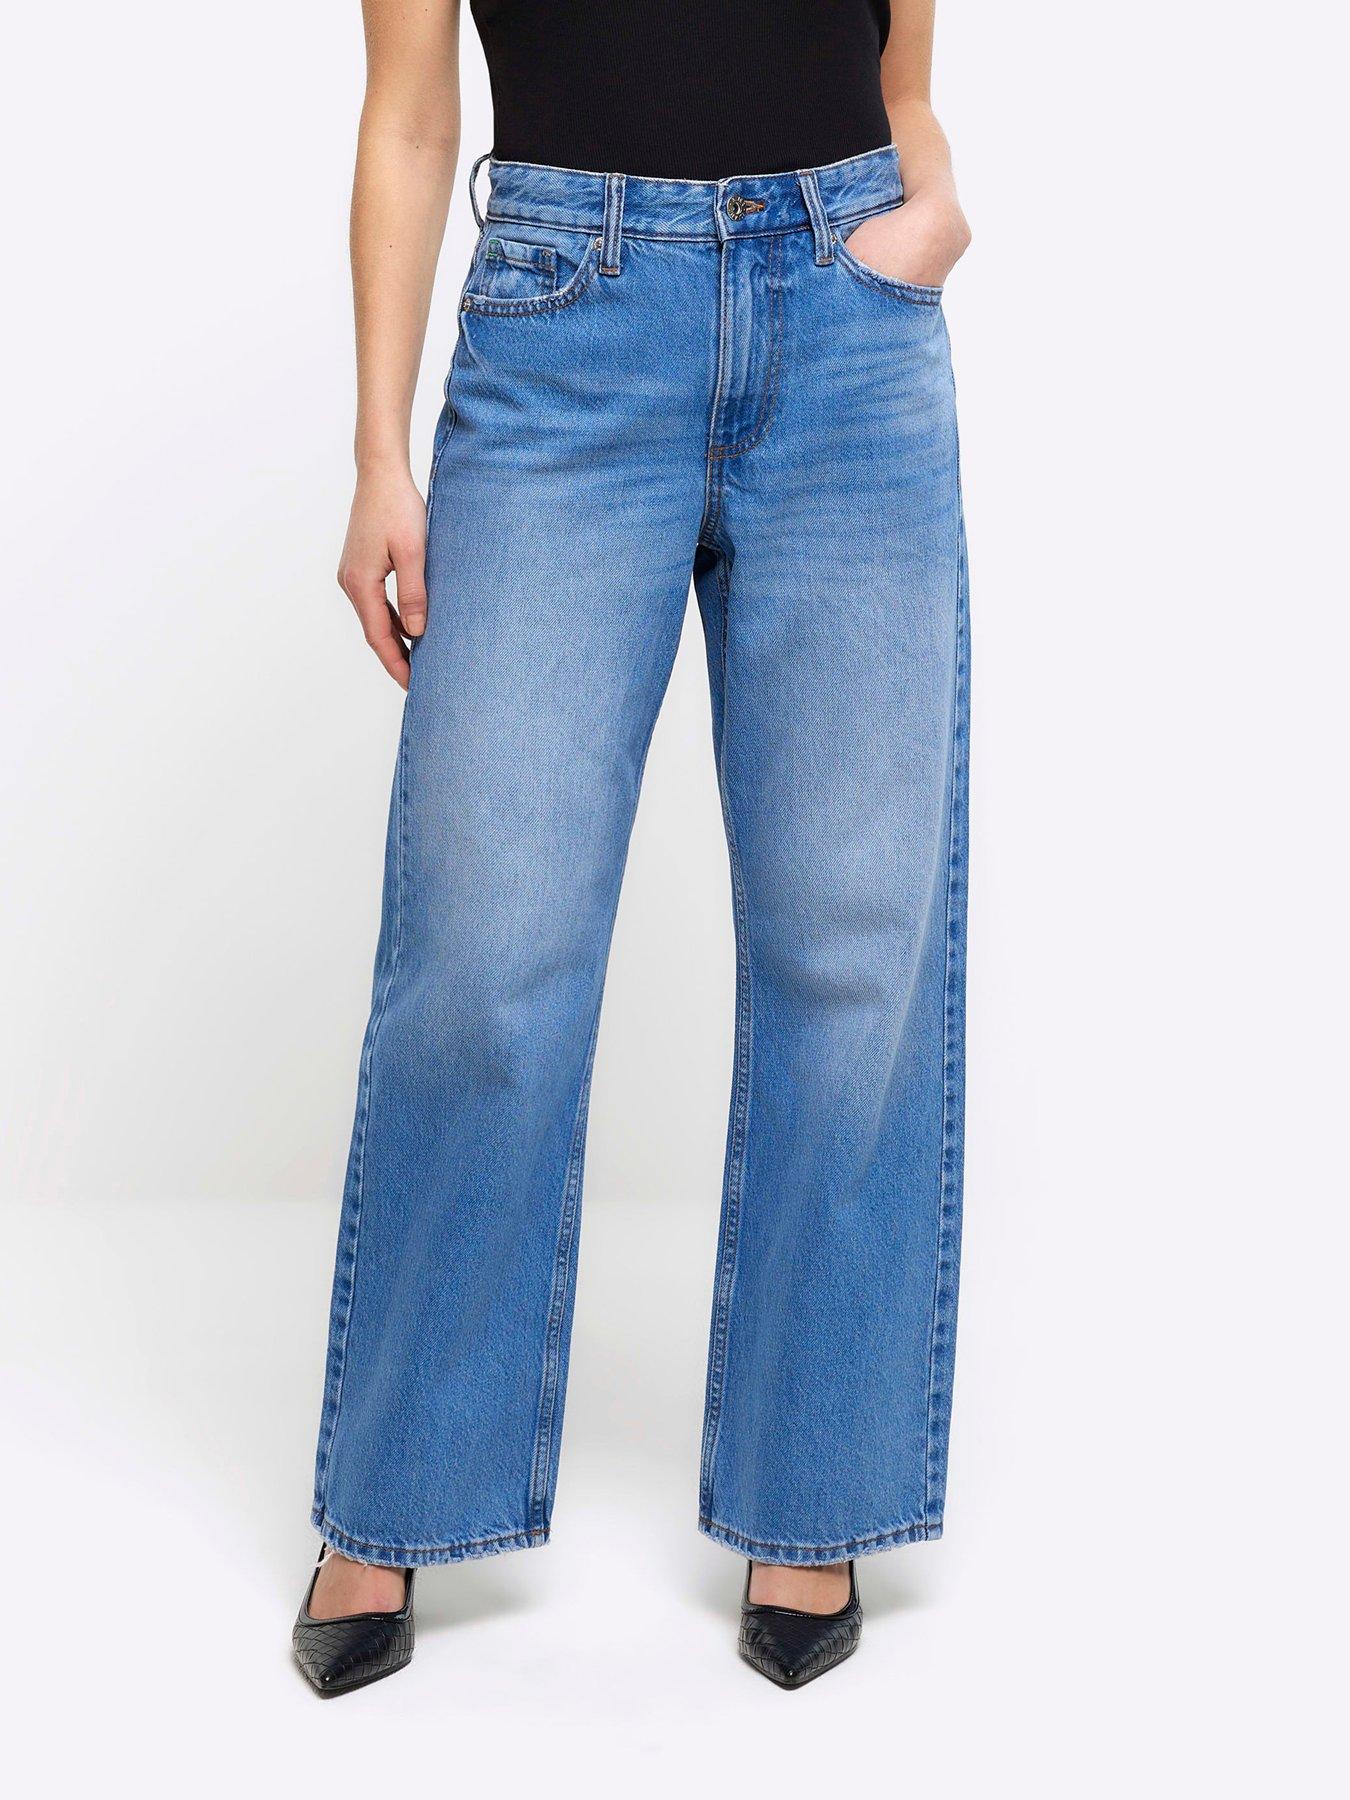 Second Life Marketplace - DH - ULTRA LOW RISE JEANS - BLUE WASHED